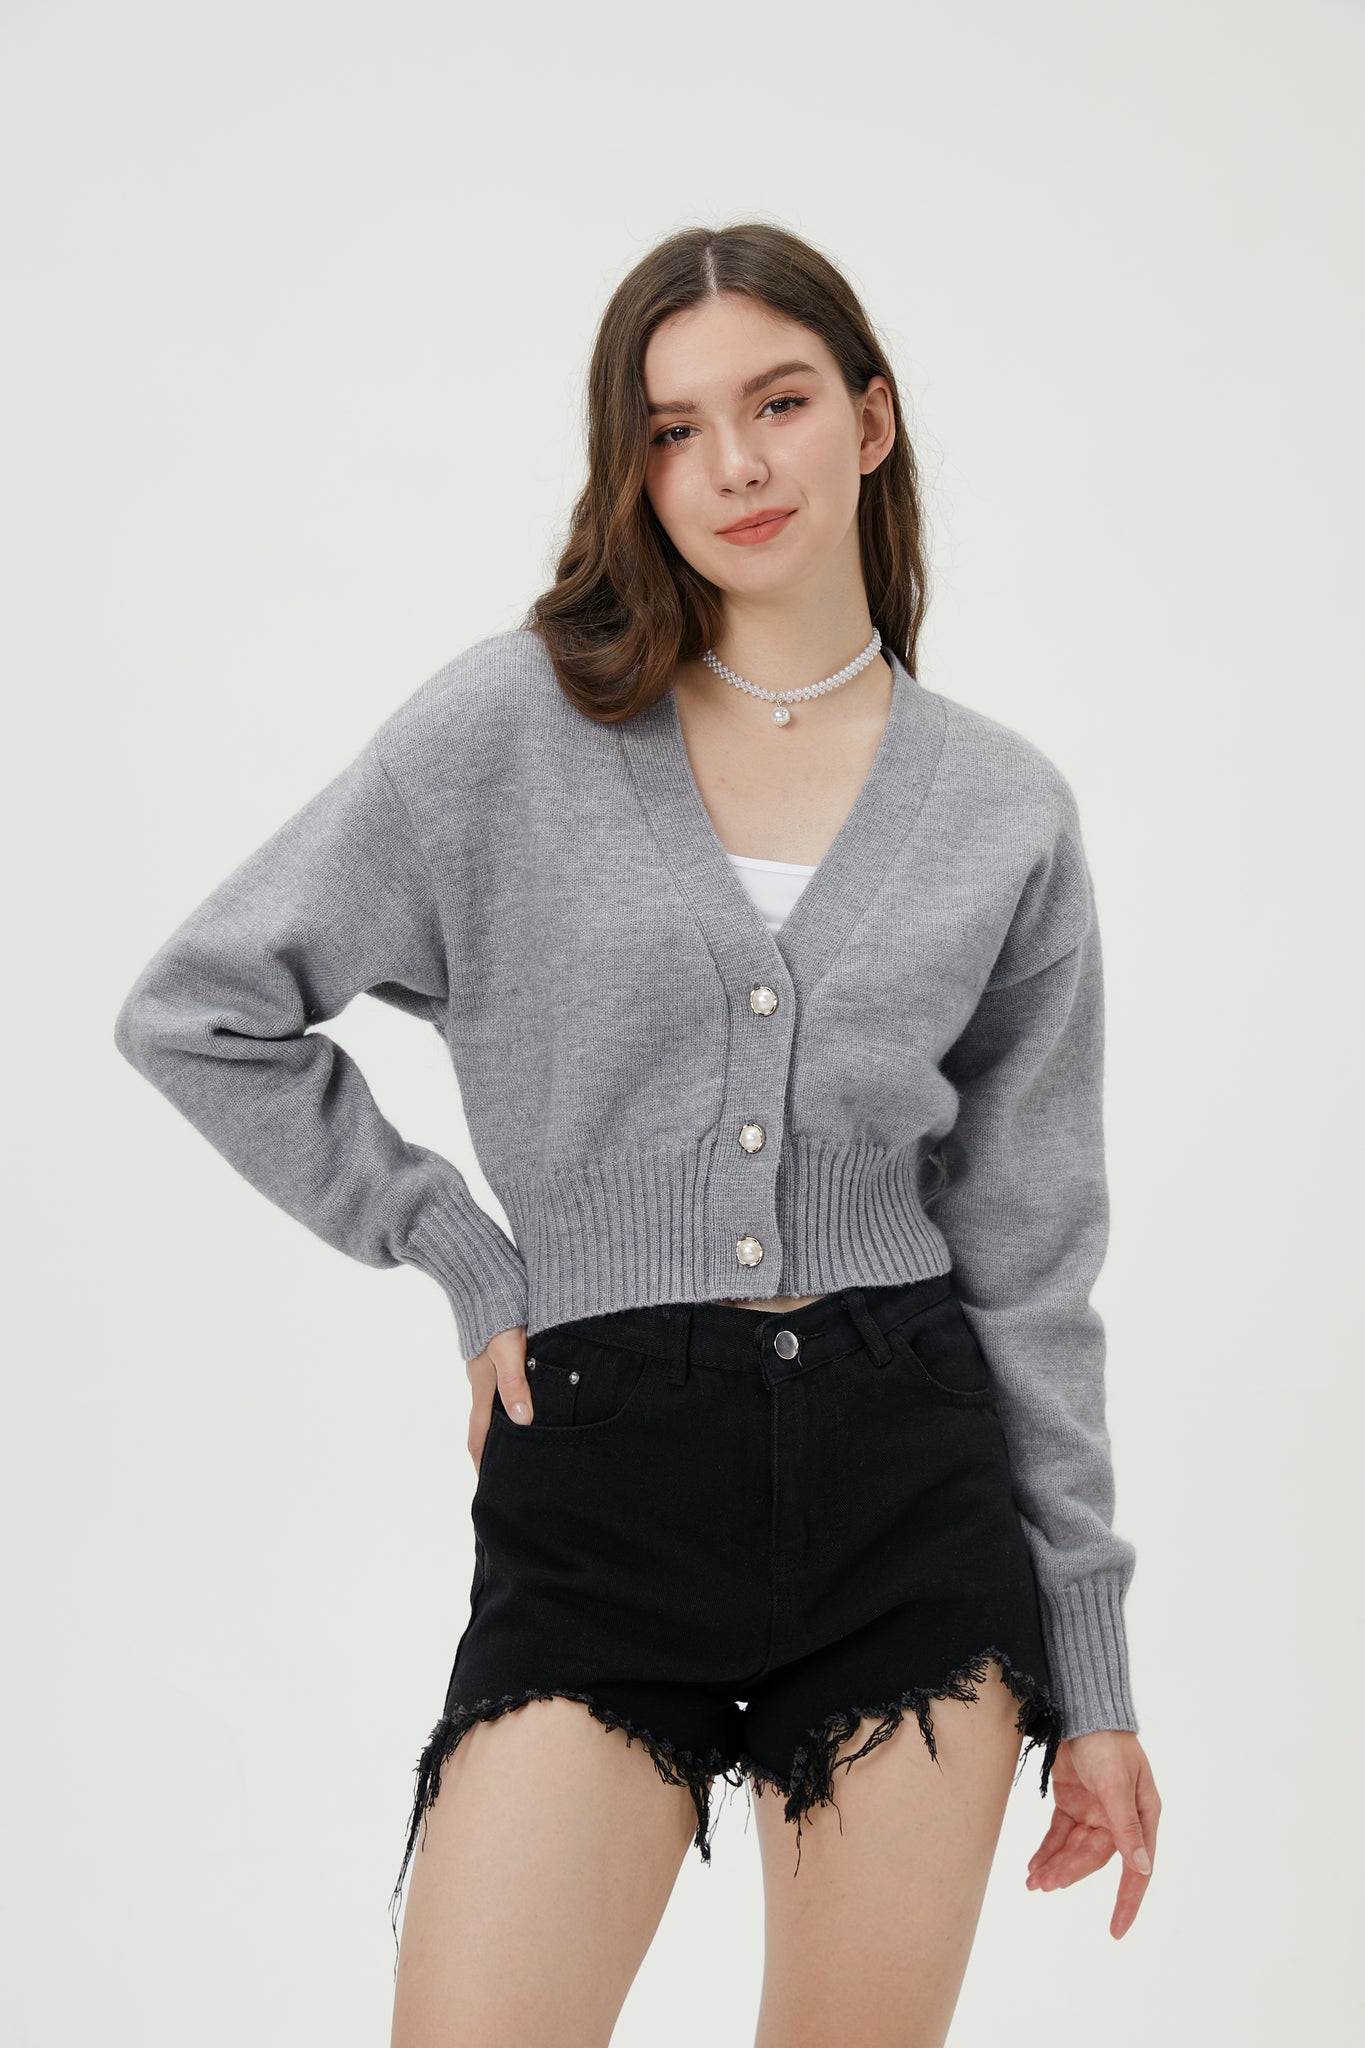 Women's Gray Cardigan Cropped Style